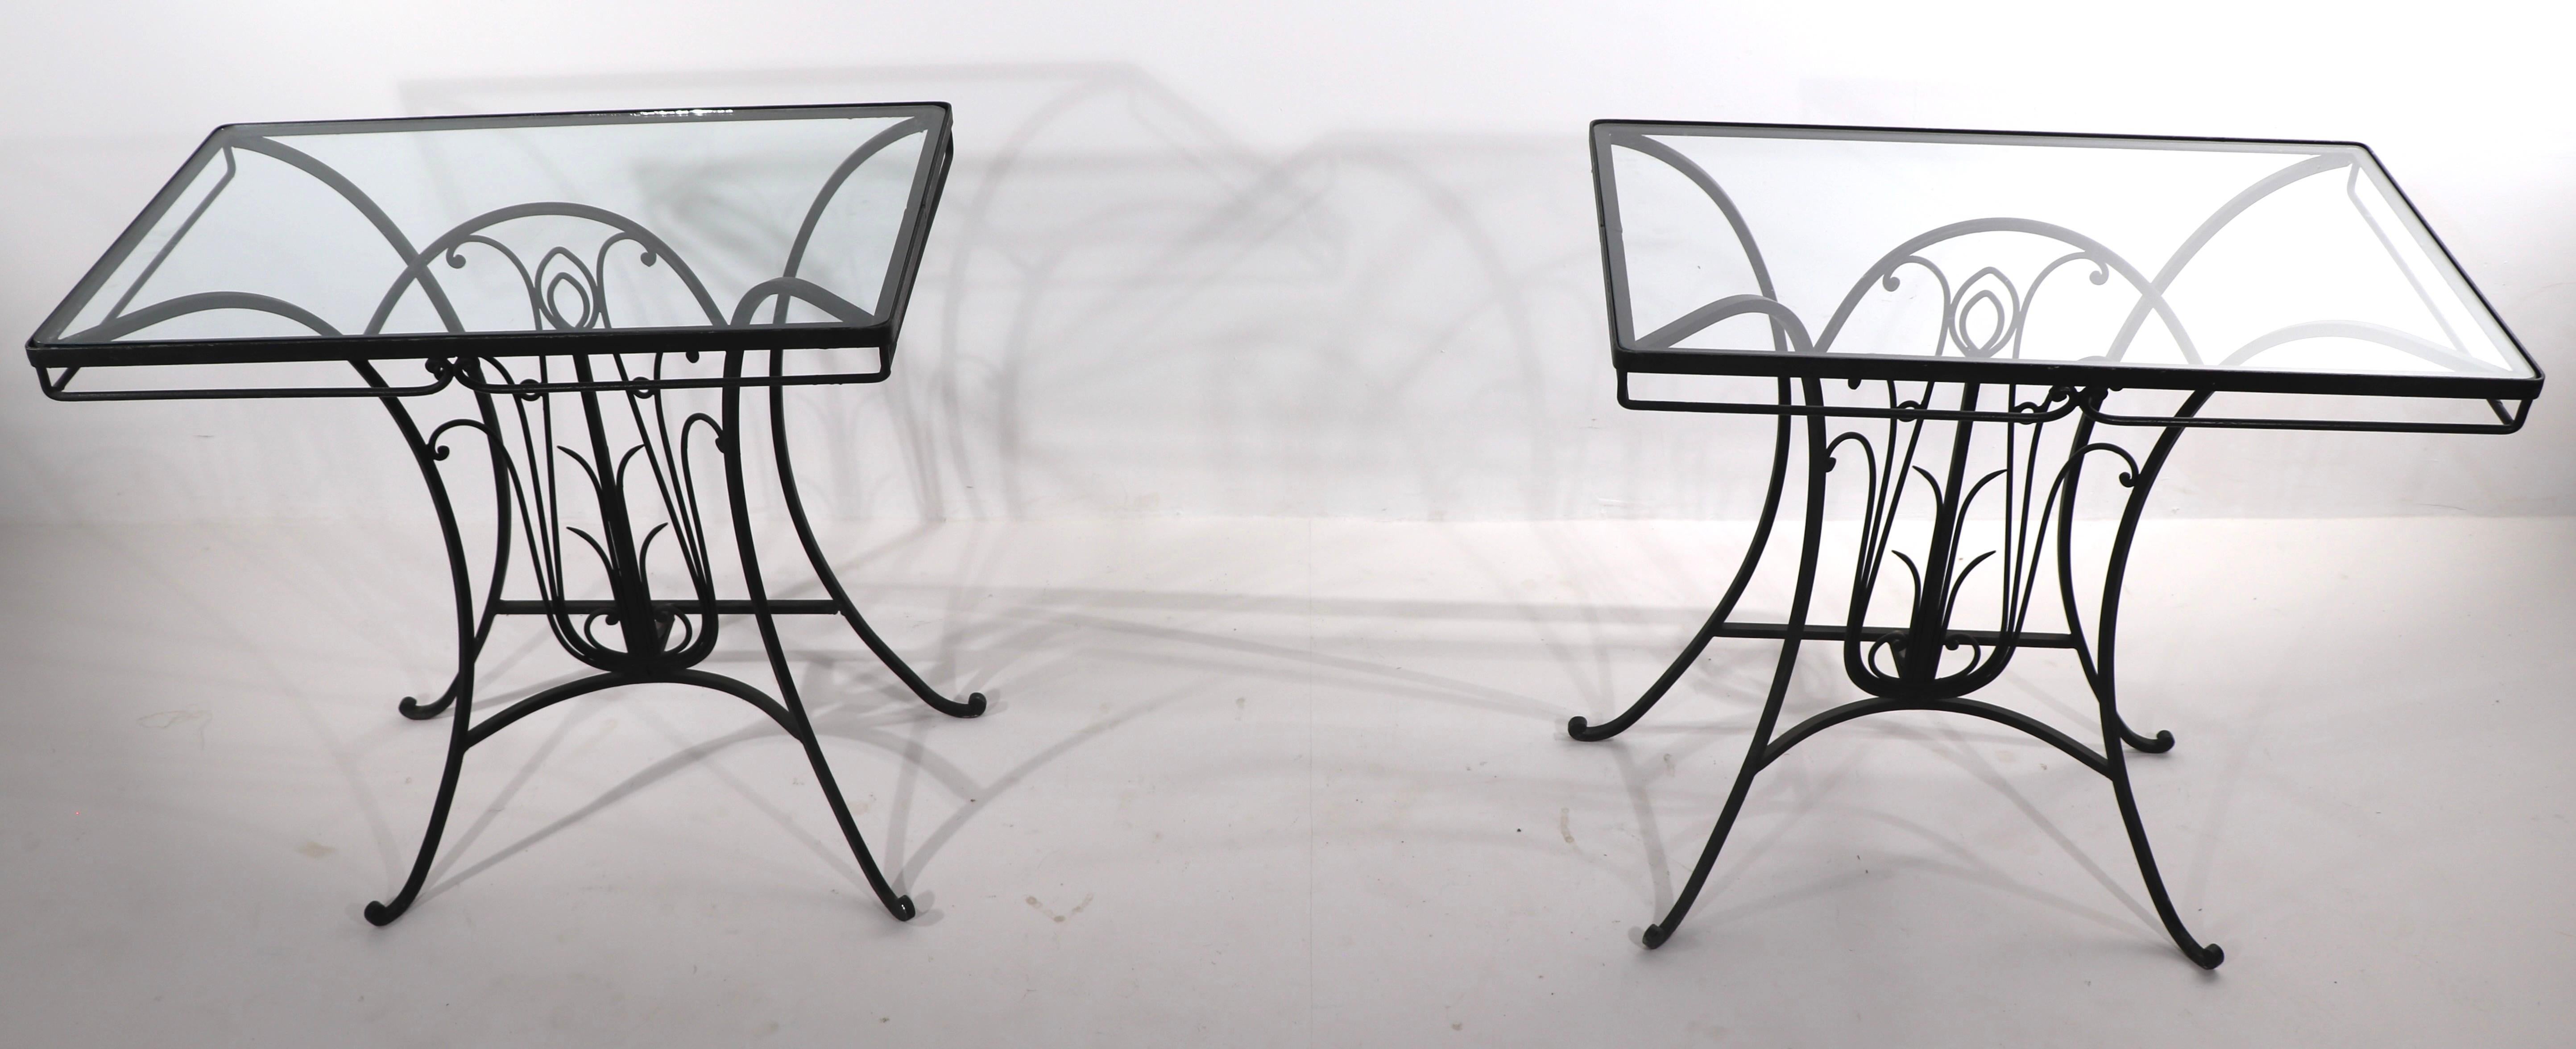 Rare pair of Art Deco period wrought iron and glass consoles, attributed to Salterini. Both tables are in very good condition, clean and ready to use. Hard to find this model, especially hard to find in pairs. Suitable for both indoor and outdoor